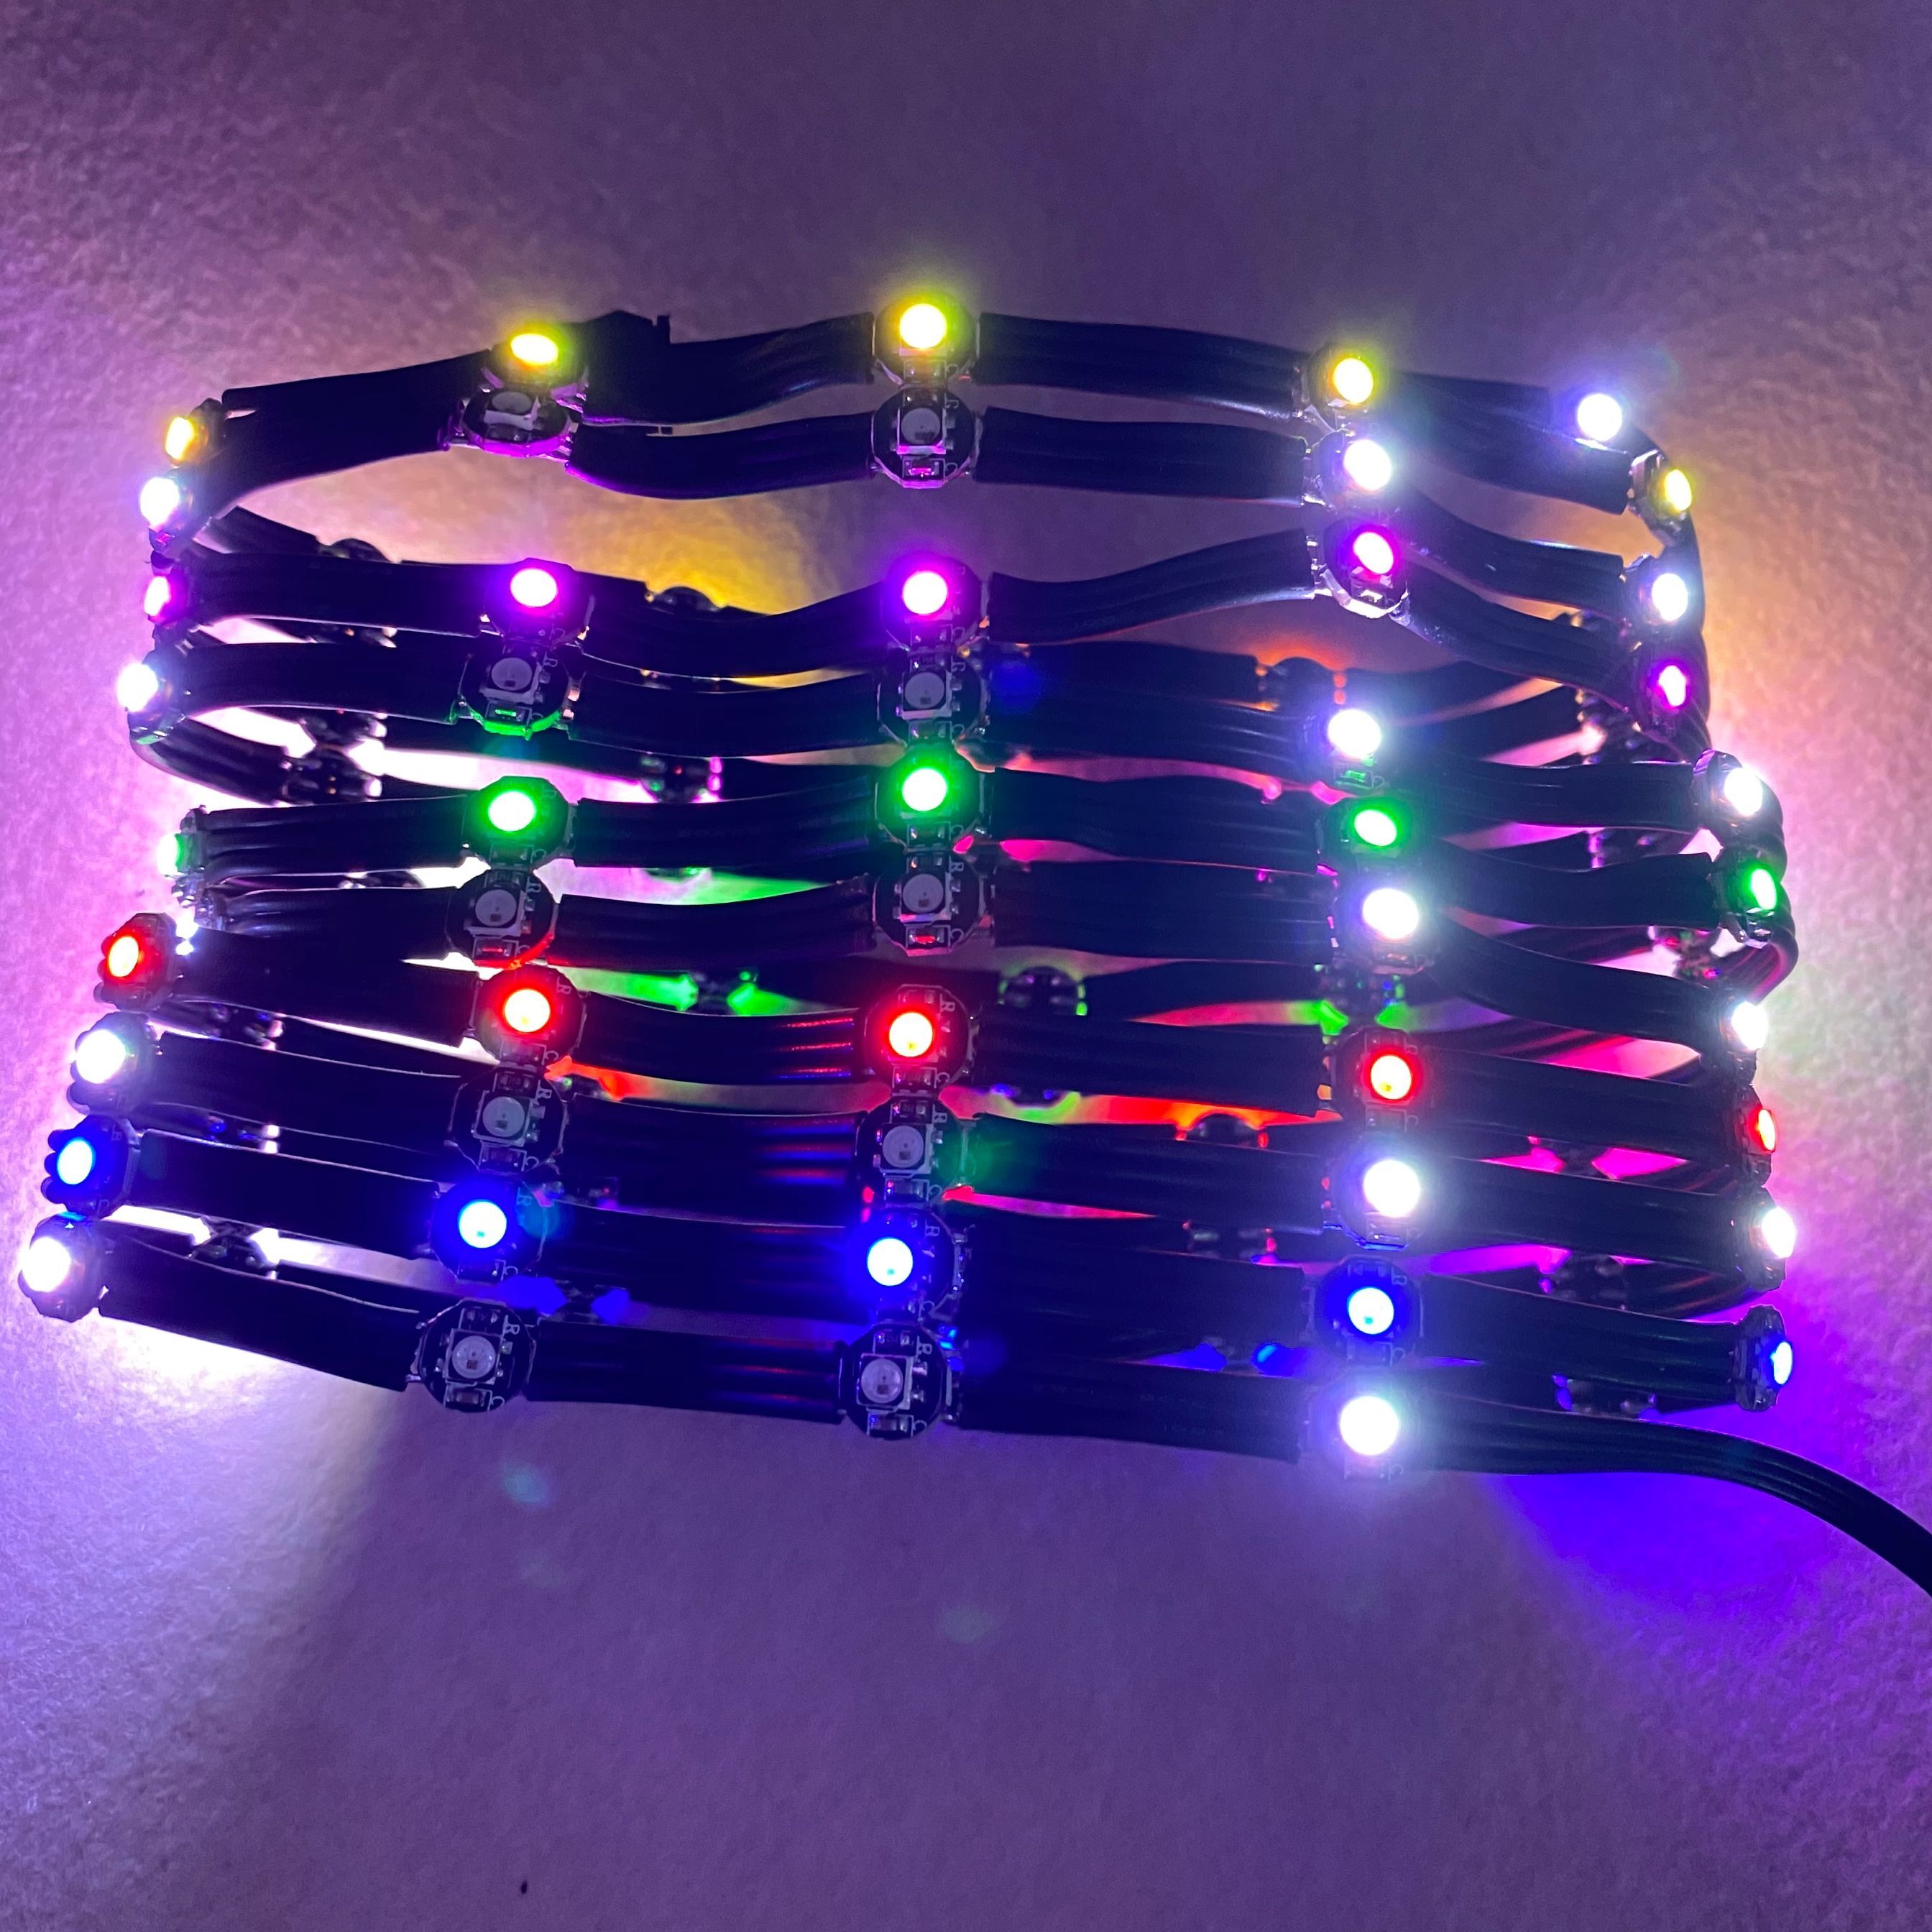 100pcs/string addressable SK6812MINI-3535 led with heatsink;DC5V input;3cm wire spacing;with all black wire and black frame LED